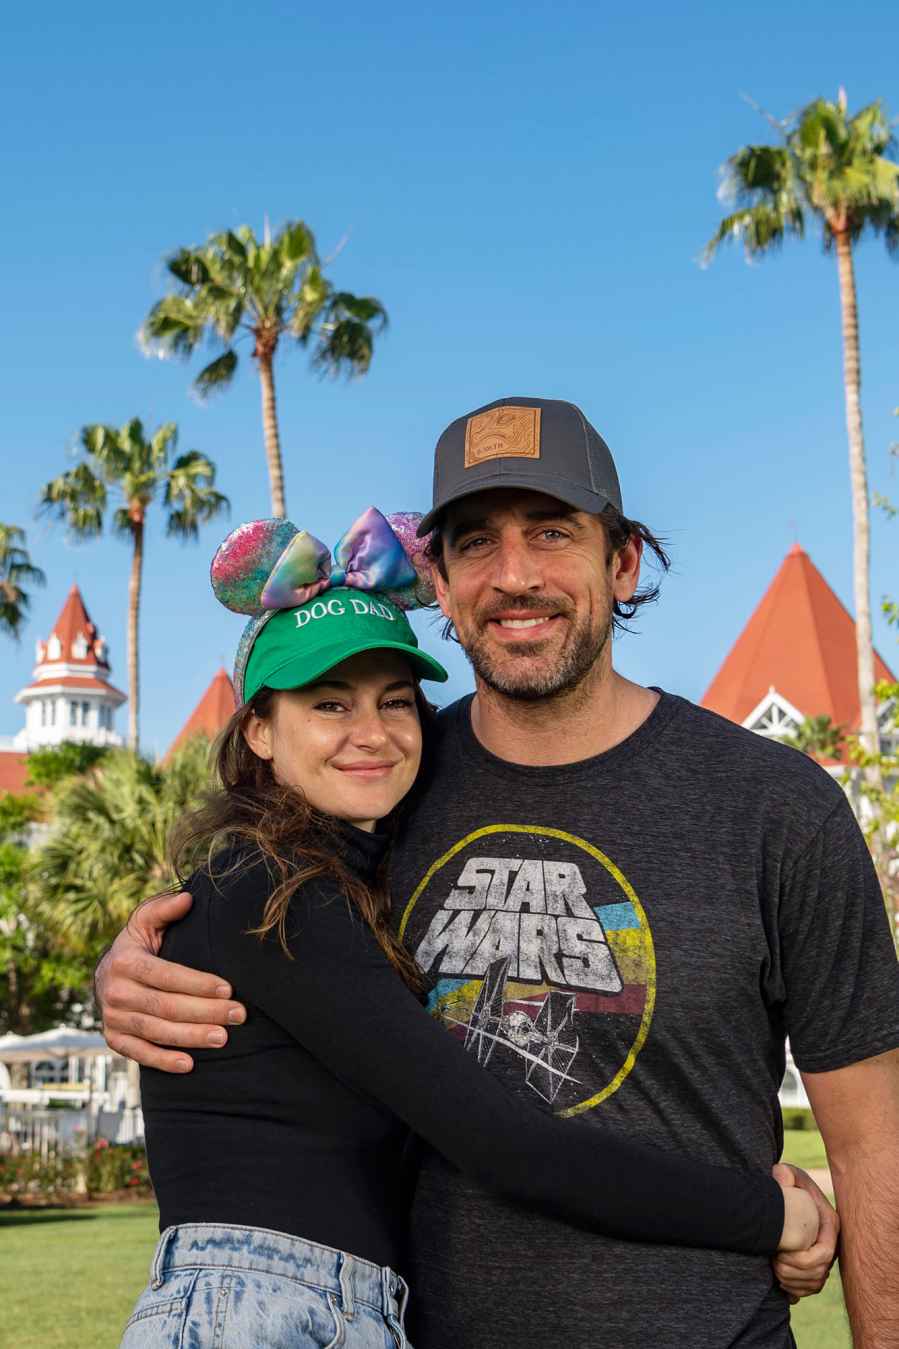 Shailene Woodley and Aaron Rodgers Pose for Adorable Photos at Disney World 6